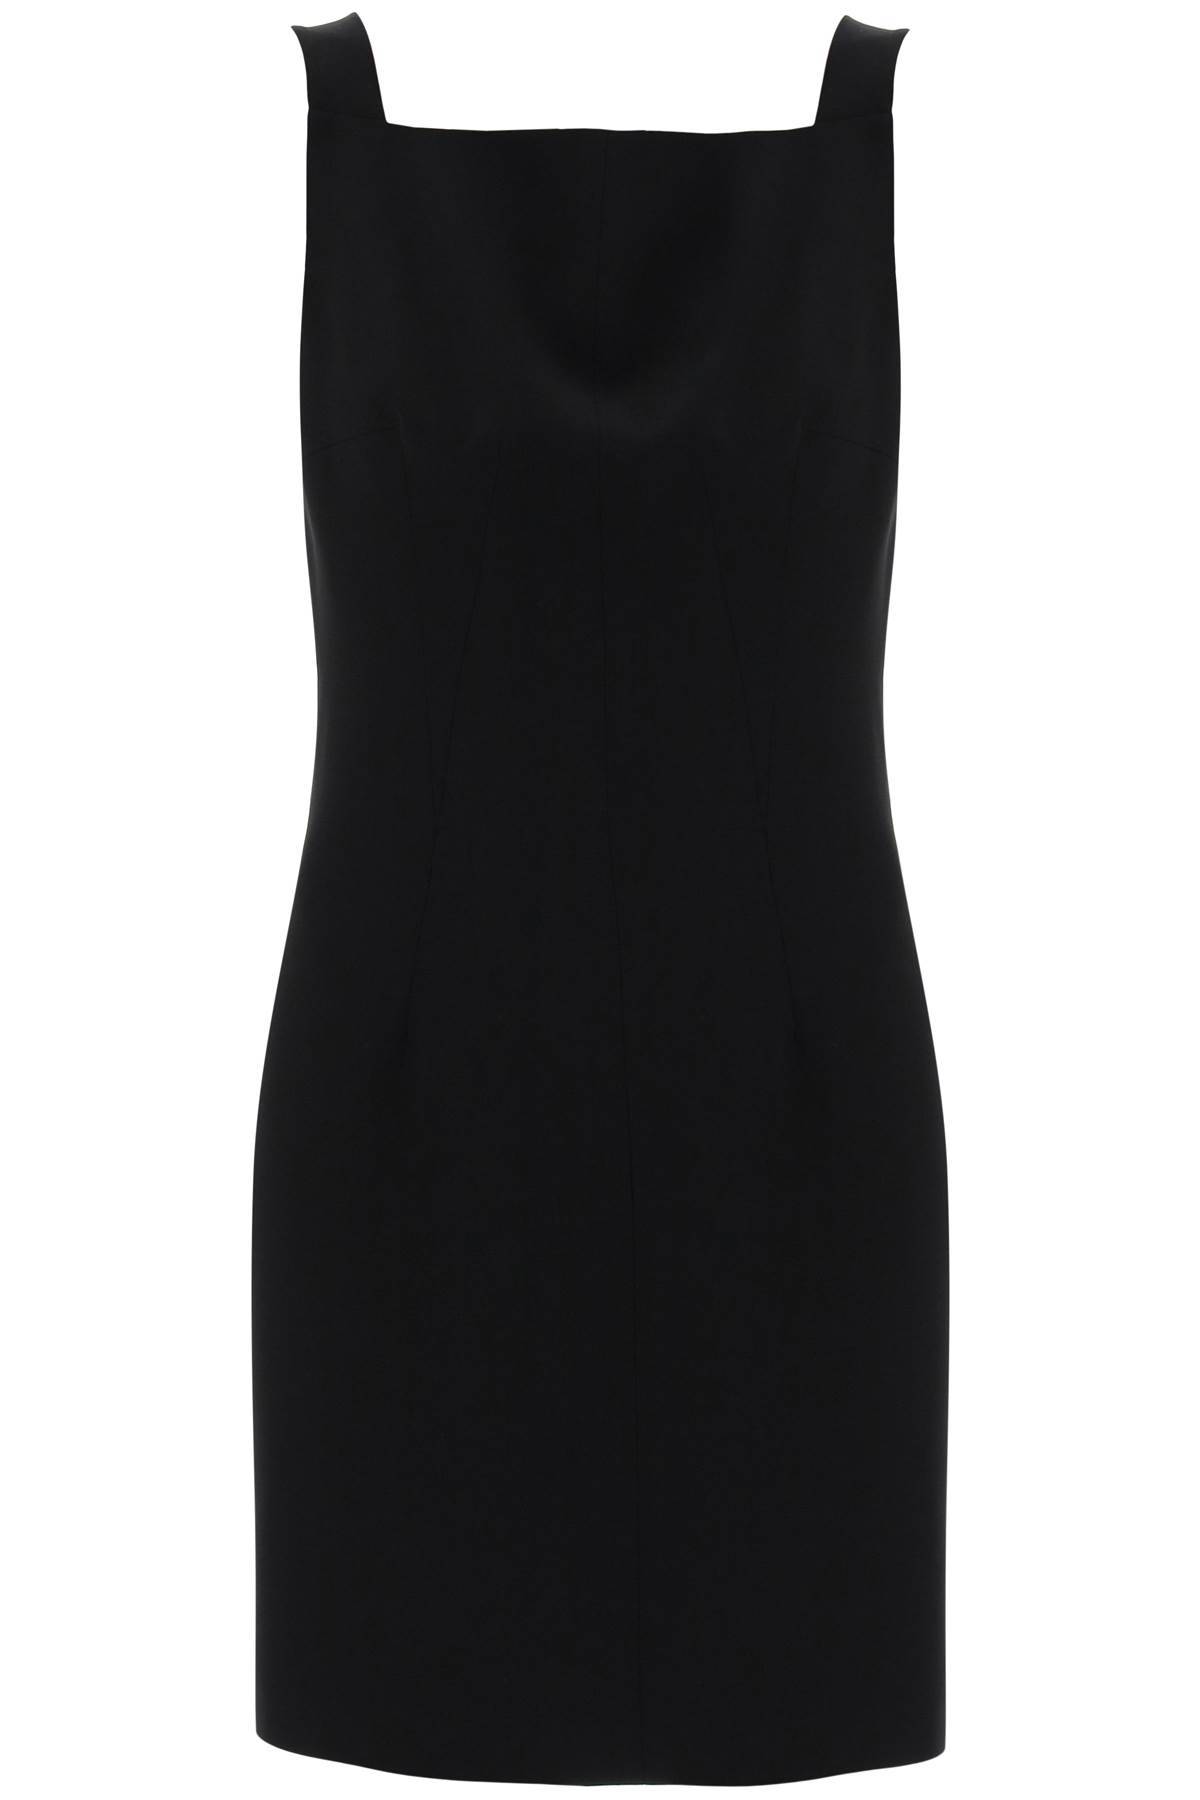 Givenchy GIVENCHY mini crepe dress in seven